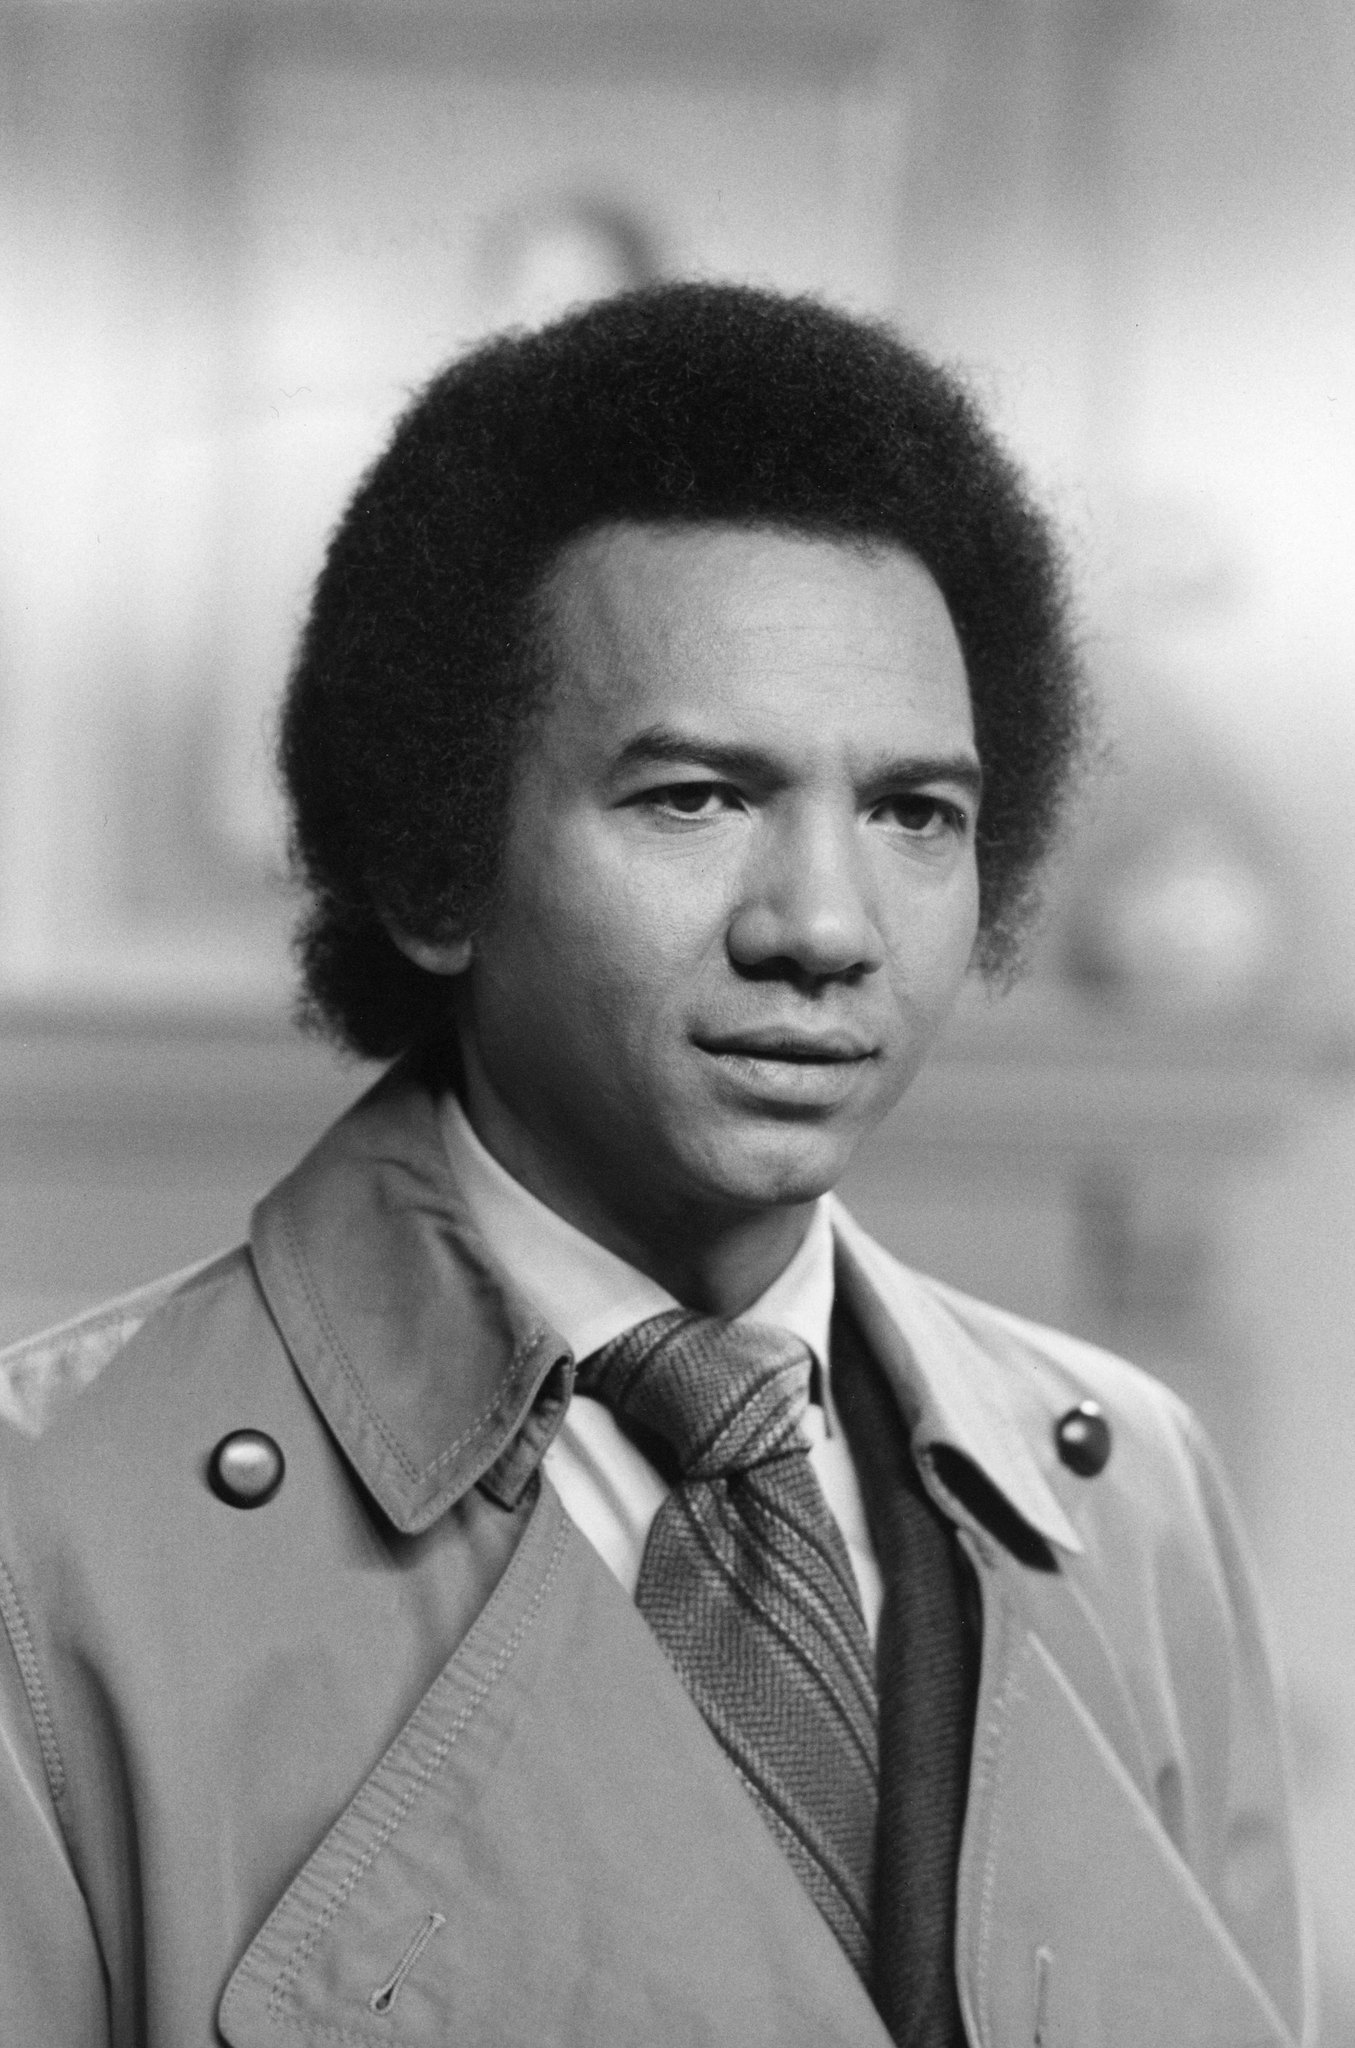 Al Freeman Jr. at event of One Life to Live (1968)